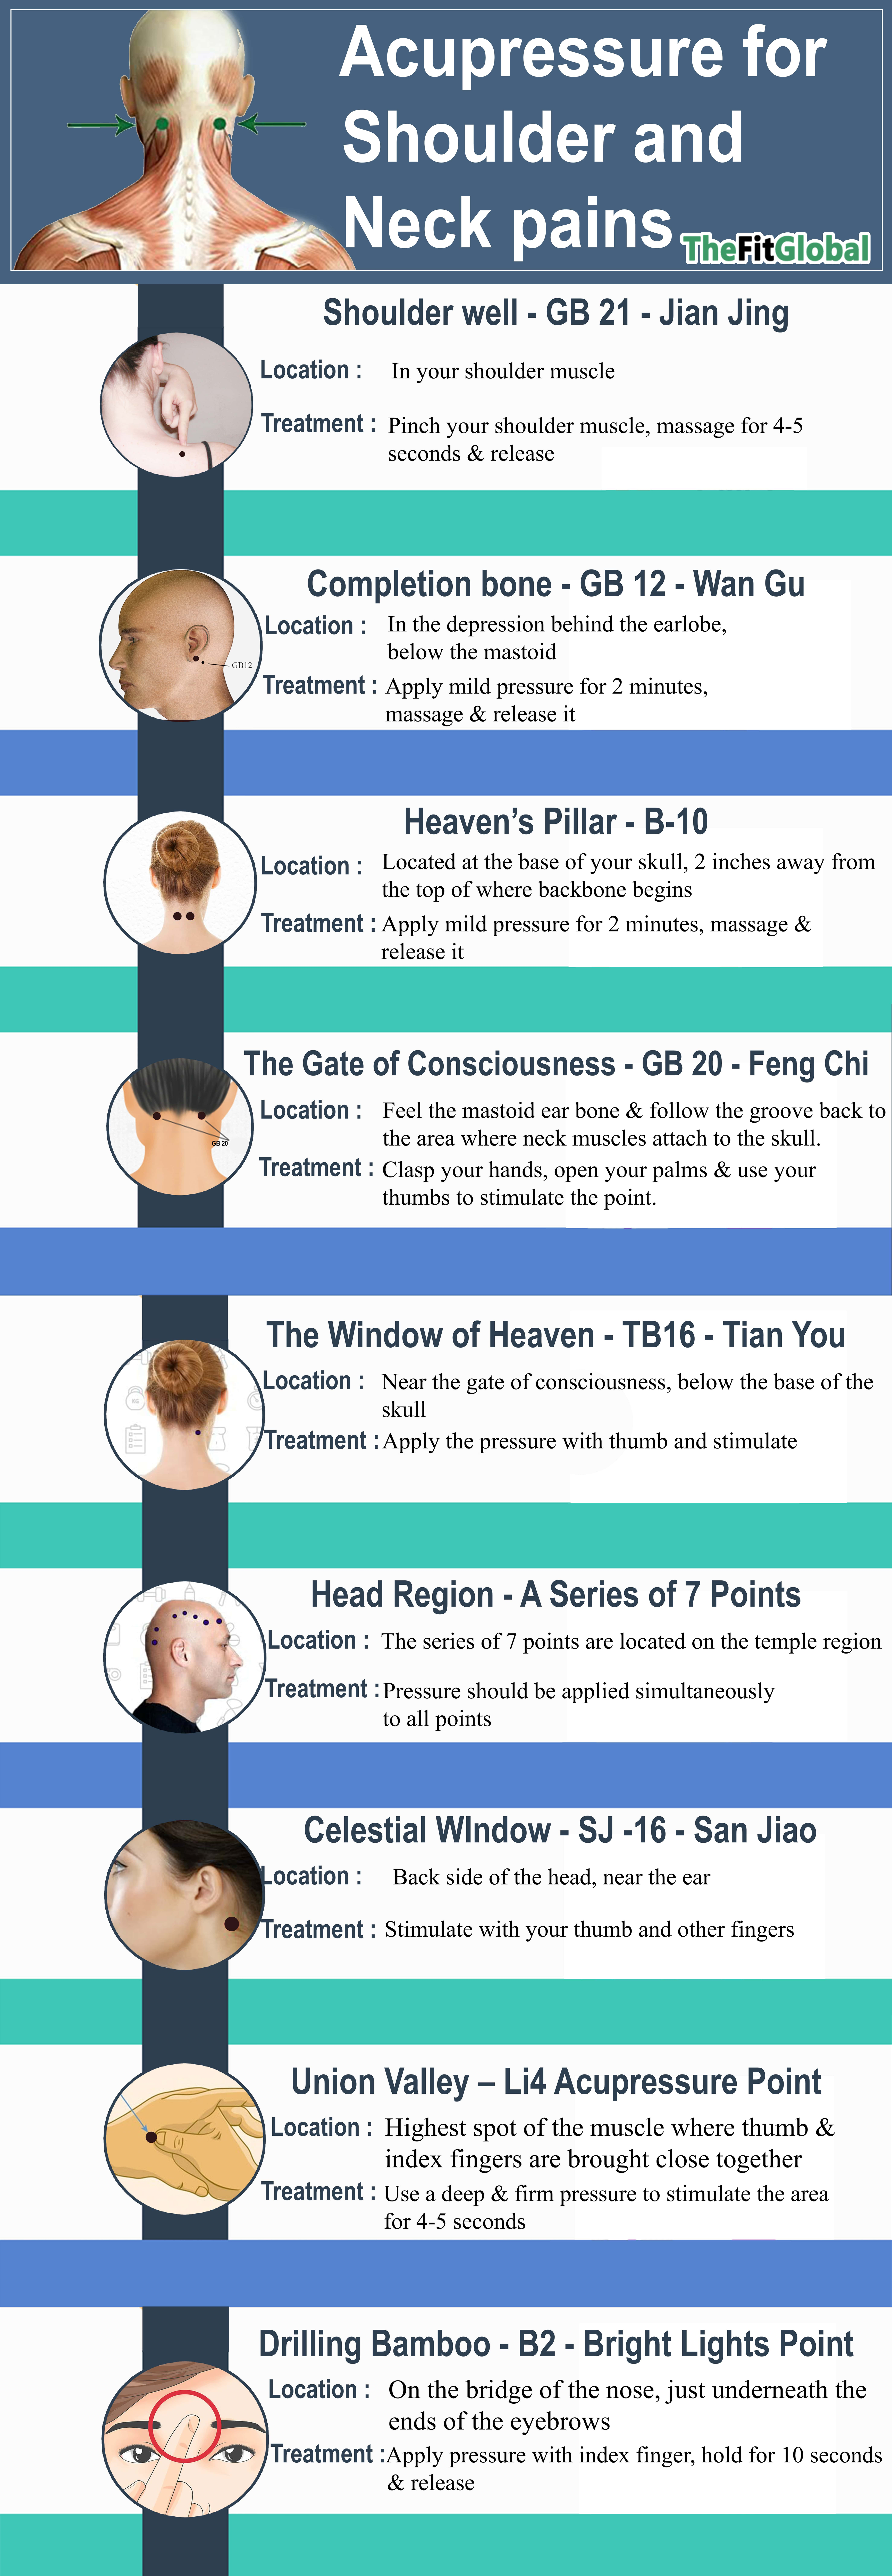 9 Acupressure Points to Cure Your Shoulder and Neck Pain